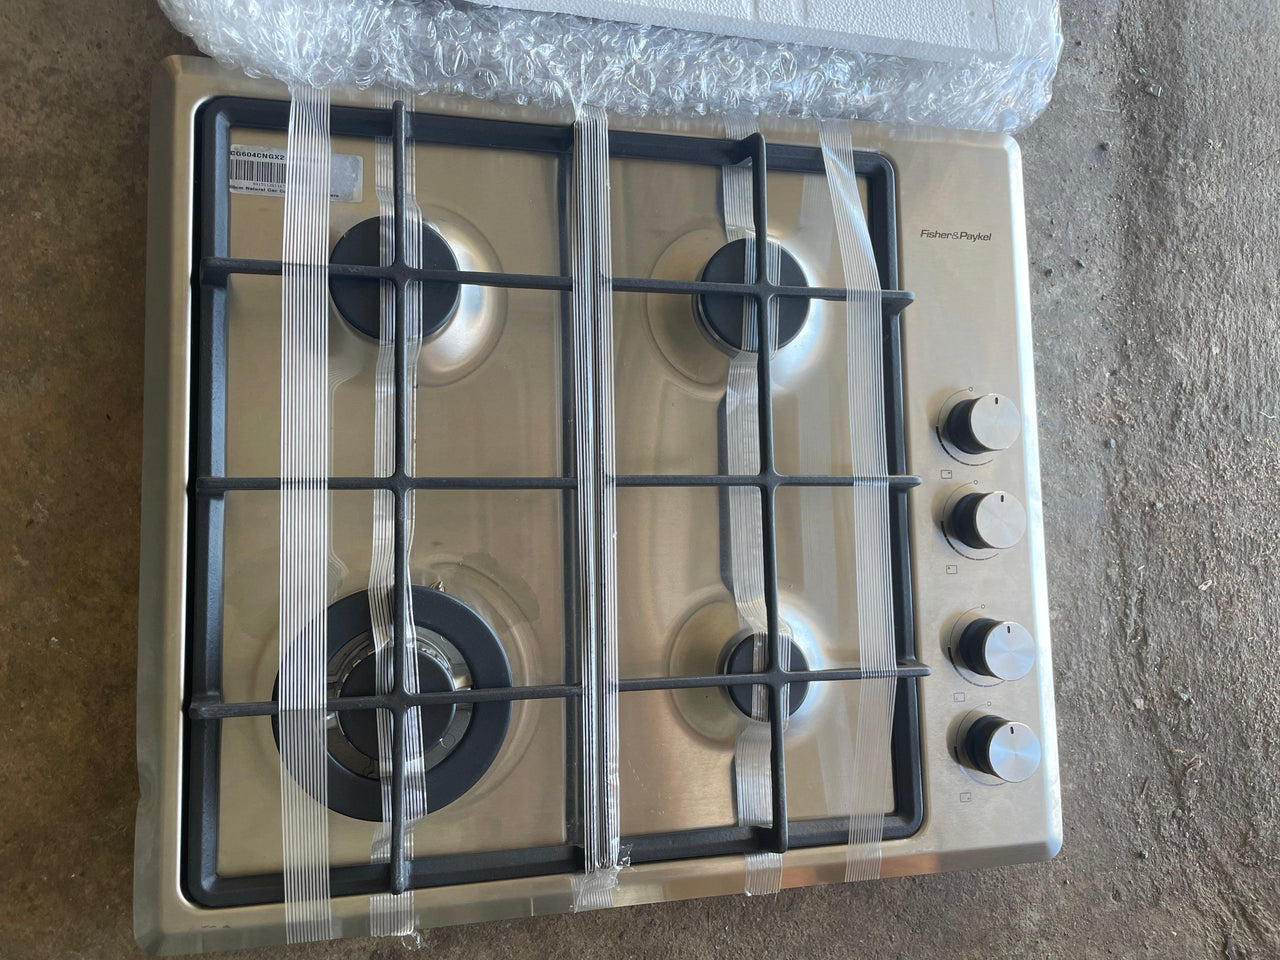 Factory second Fisher & Paykel 60cm Natural Gas Cooktop CG604CNGX2 - Second Hand Appliances Geebung